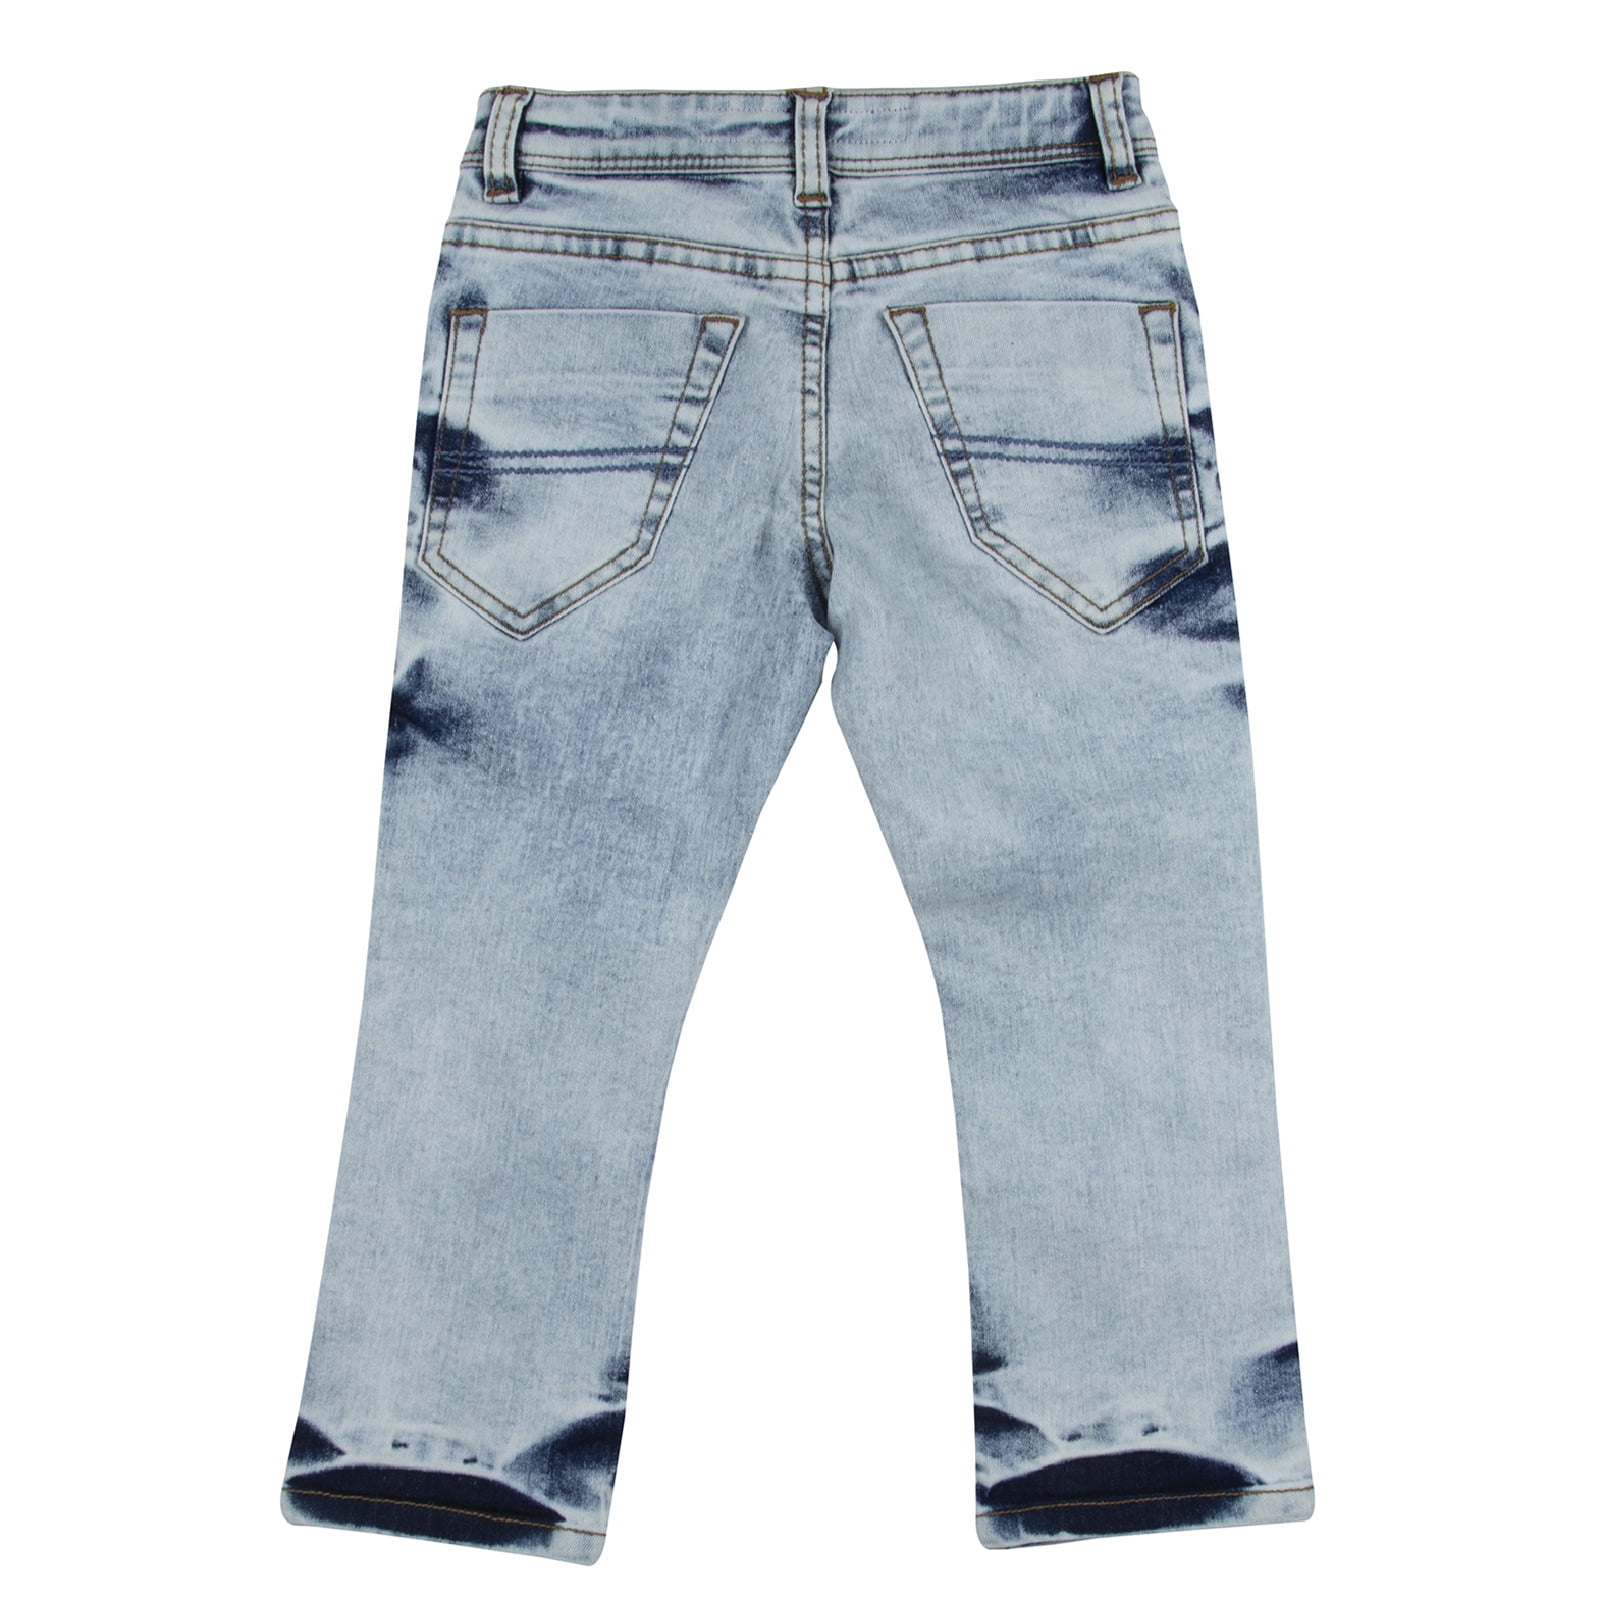 R.G. Jeans Dark Blue Kids Plain Faded Jeans at Rs 150/piece in